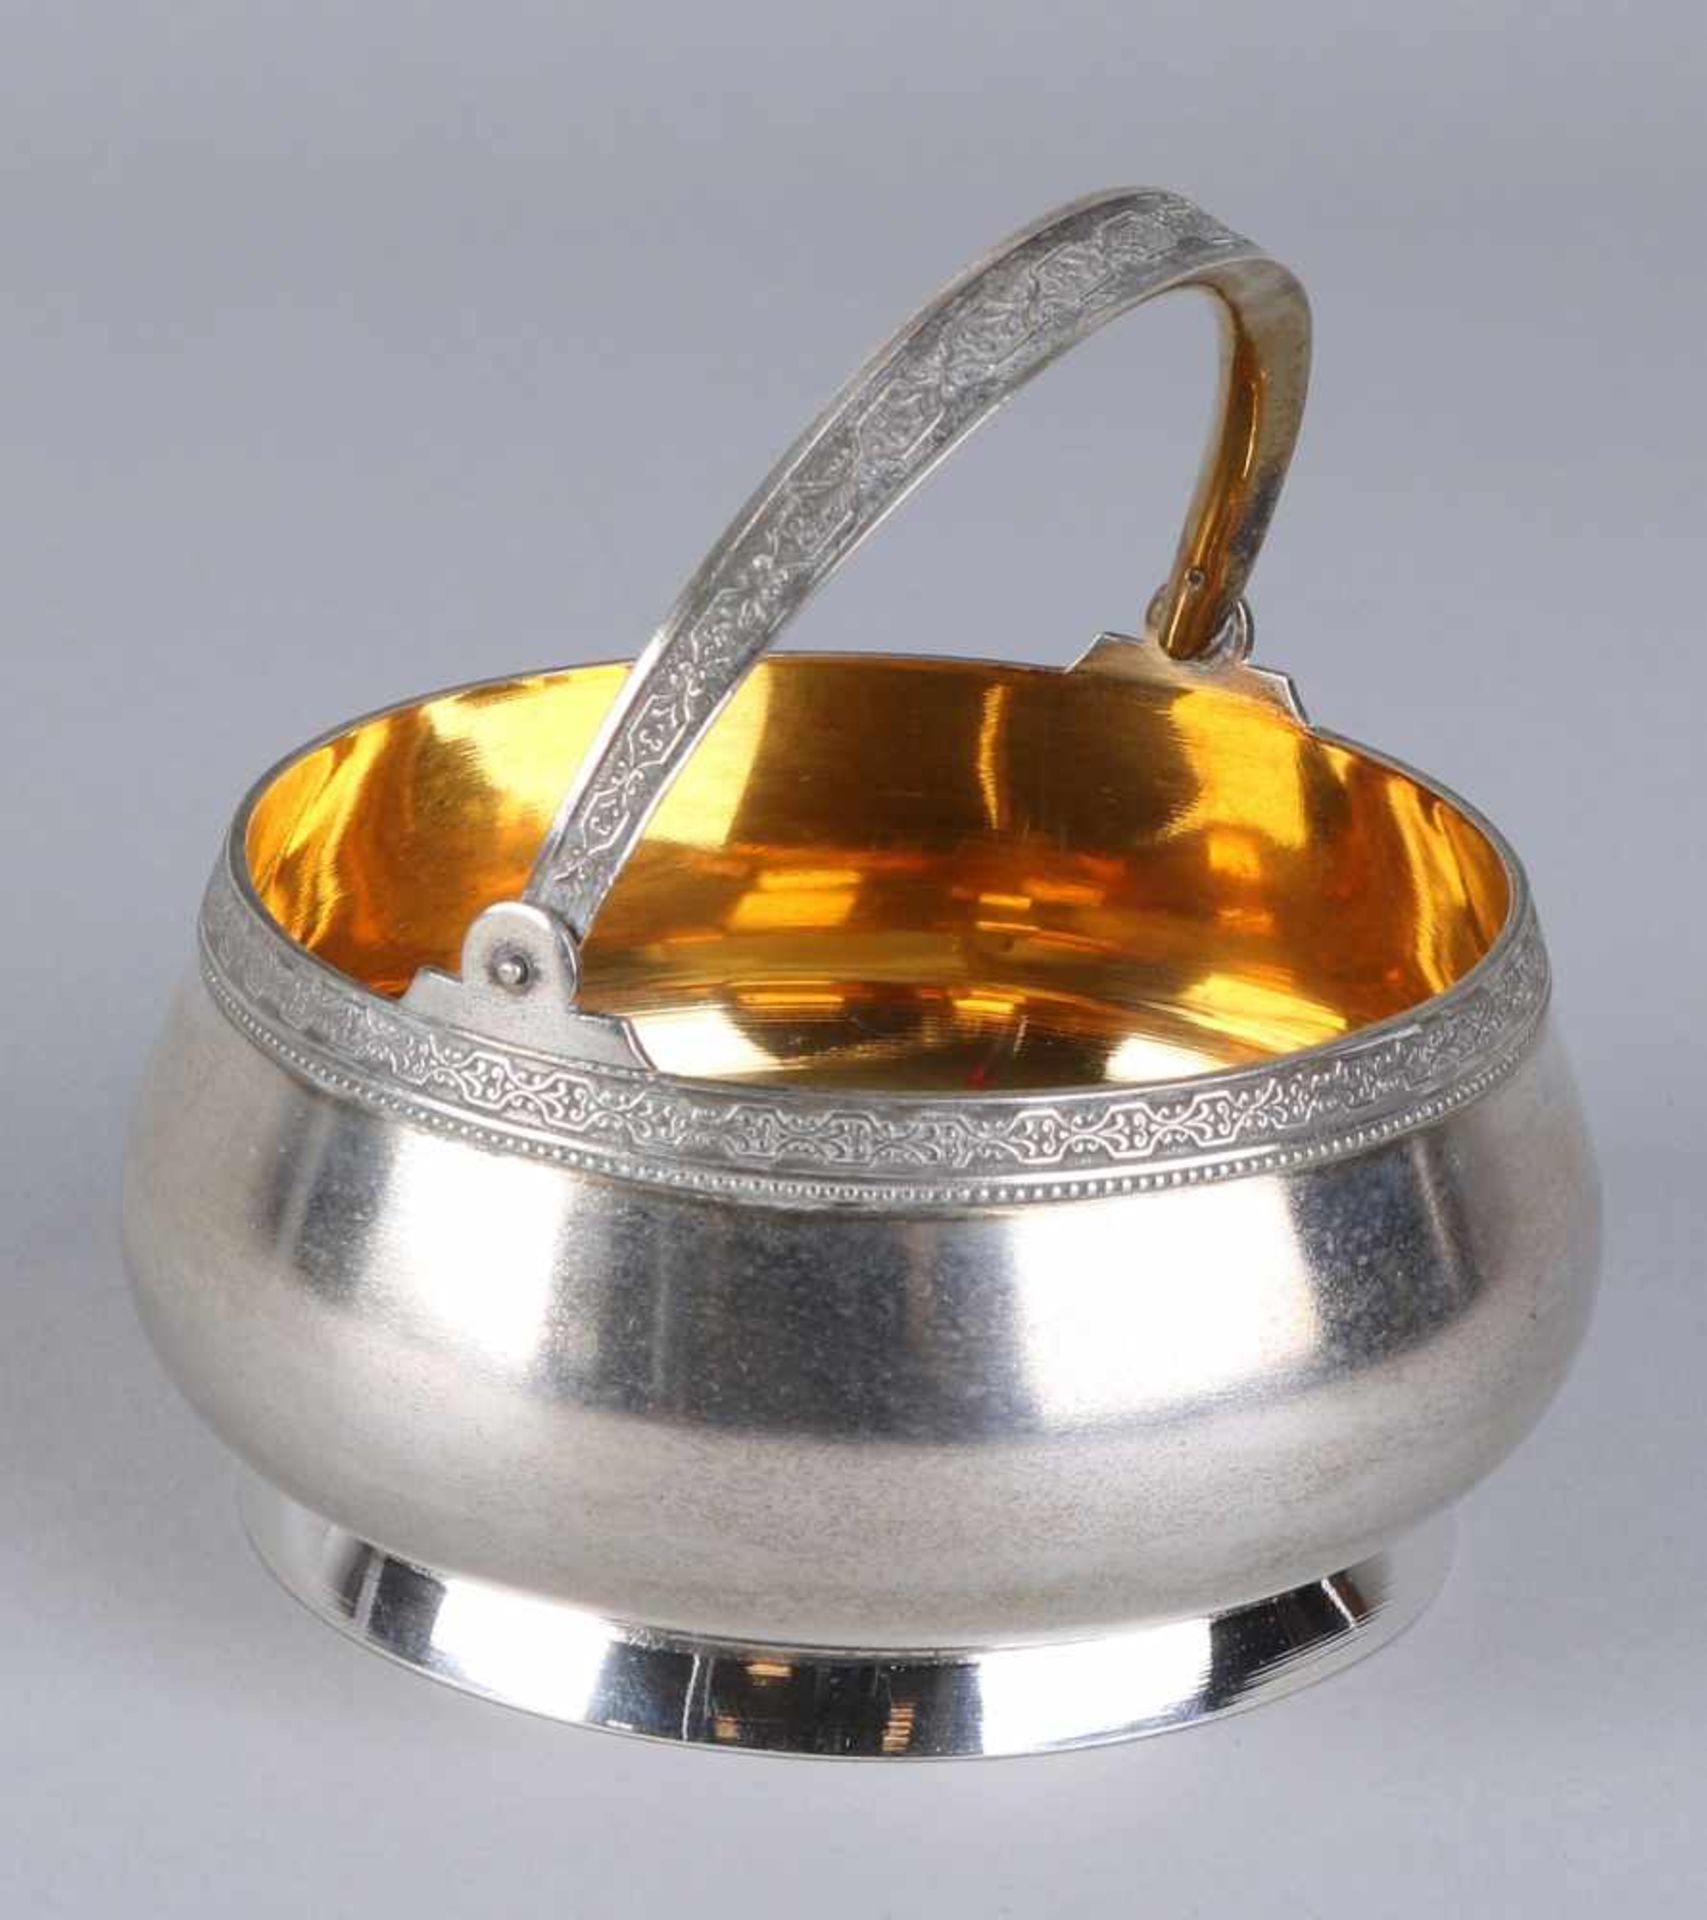 Silver sugar bowl, 916/000, Russian, Round model with machined edge and handle decorated with